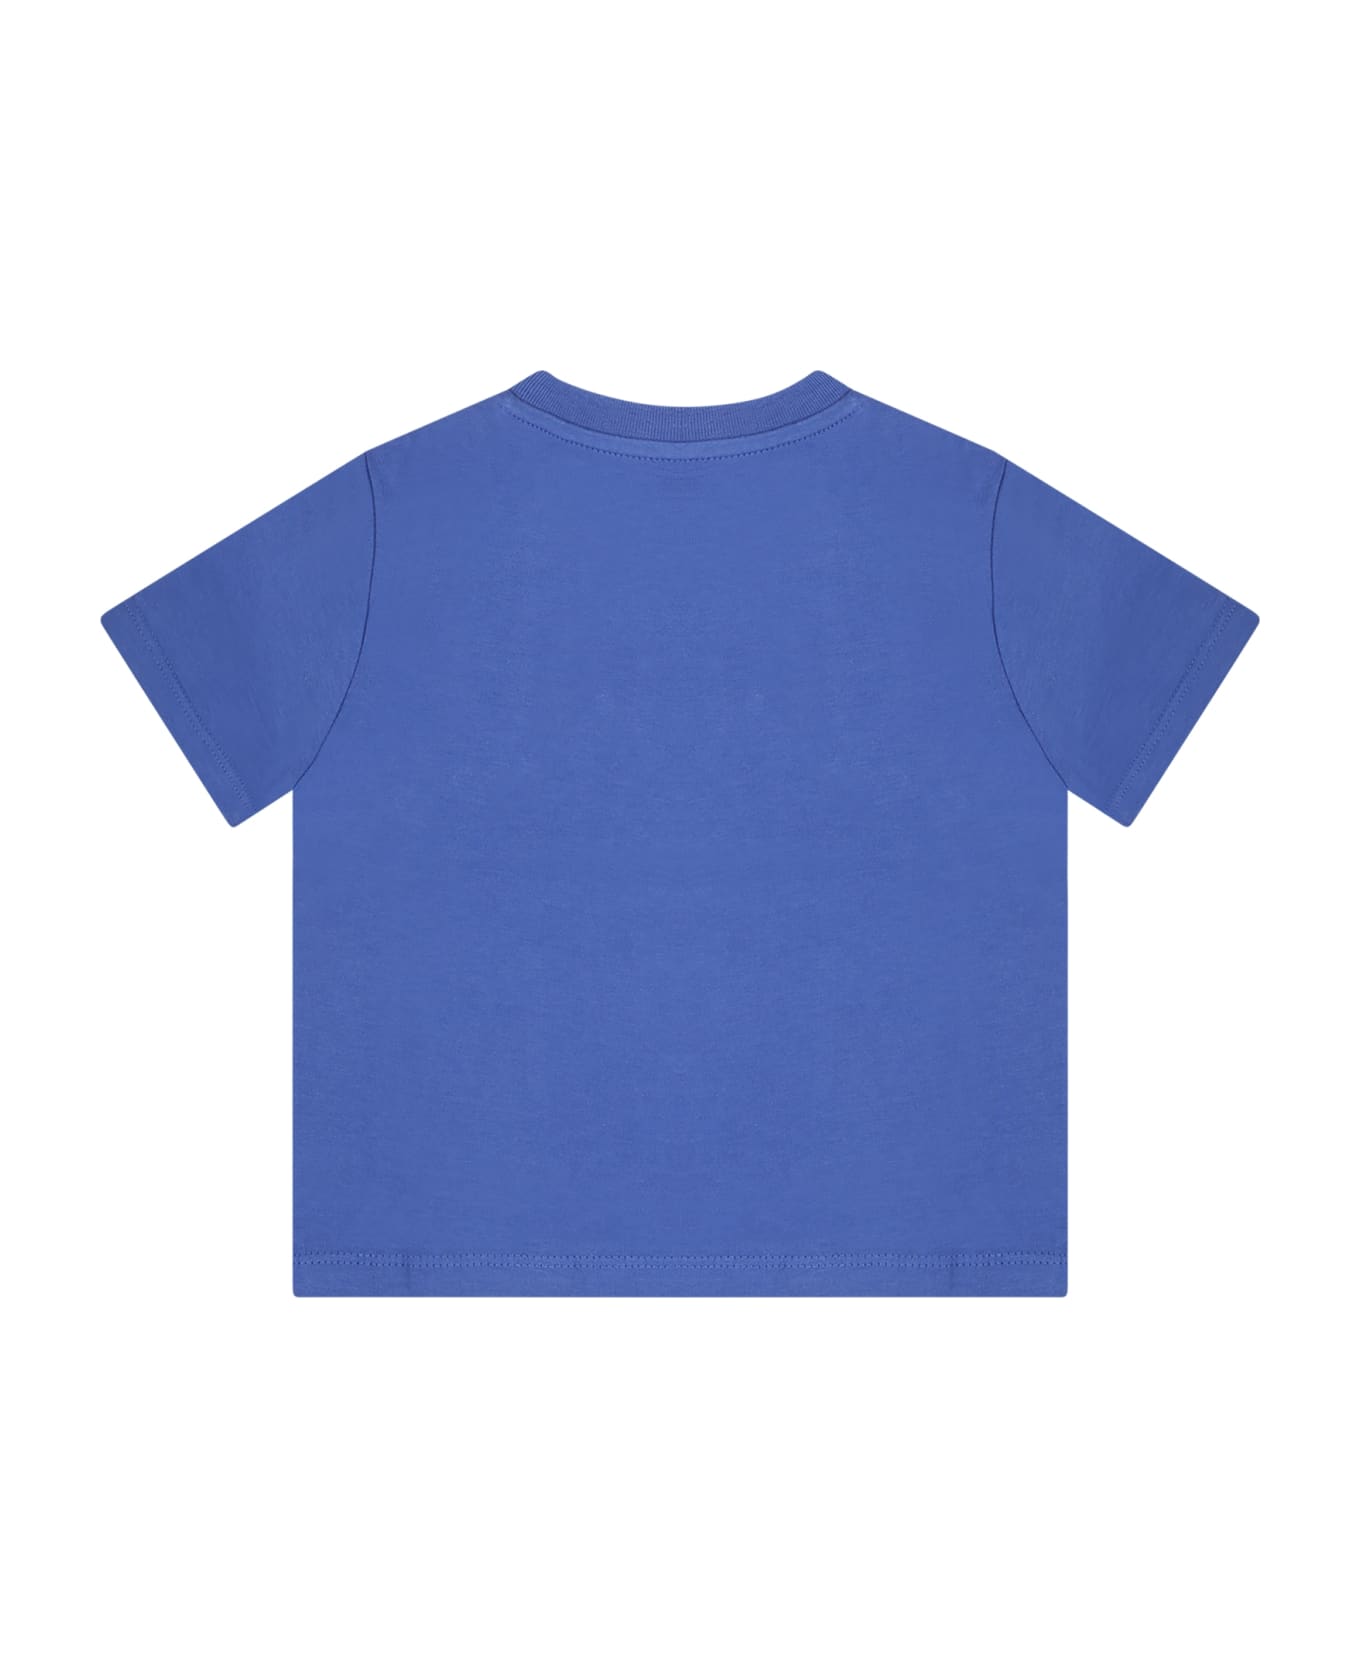 Ralph Lauren Blue T-shirt For Baby Boy With Pony - Blue